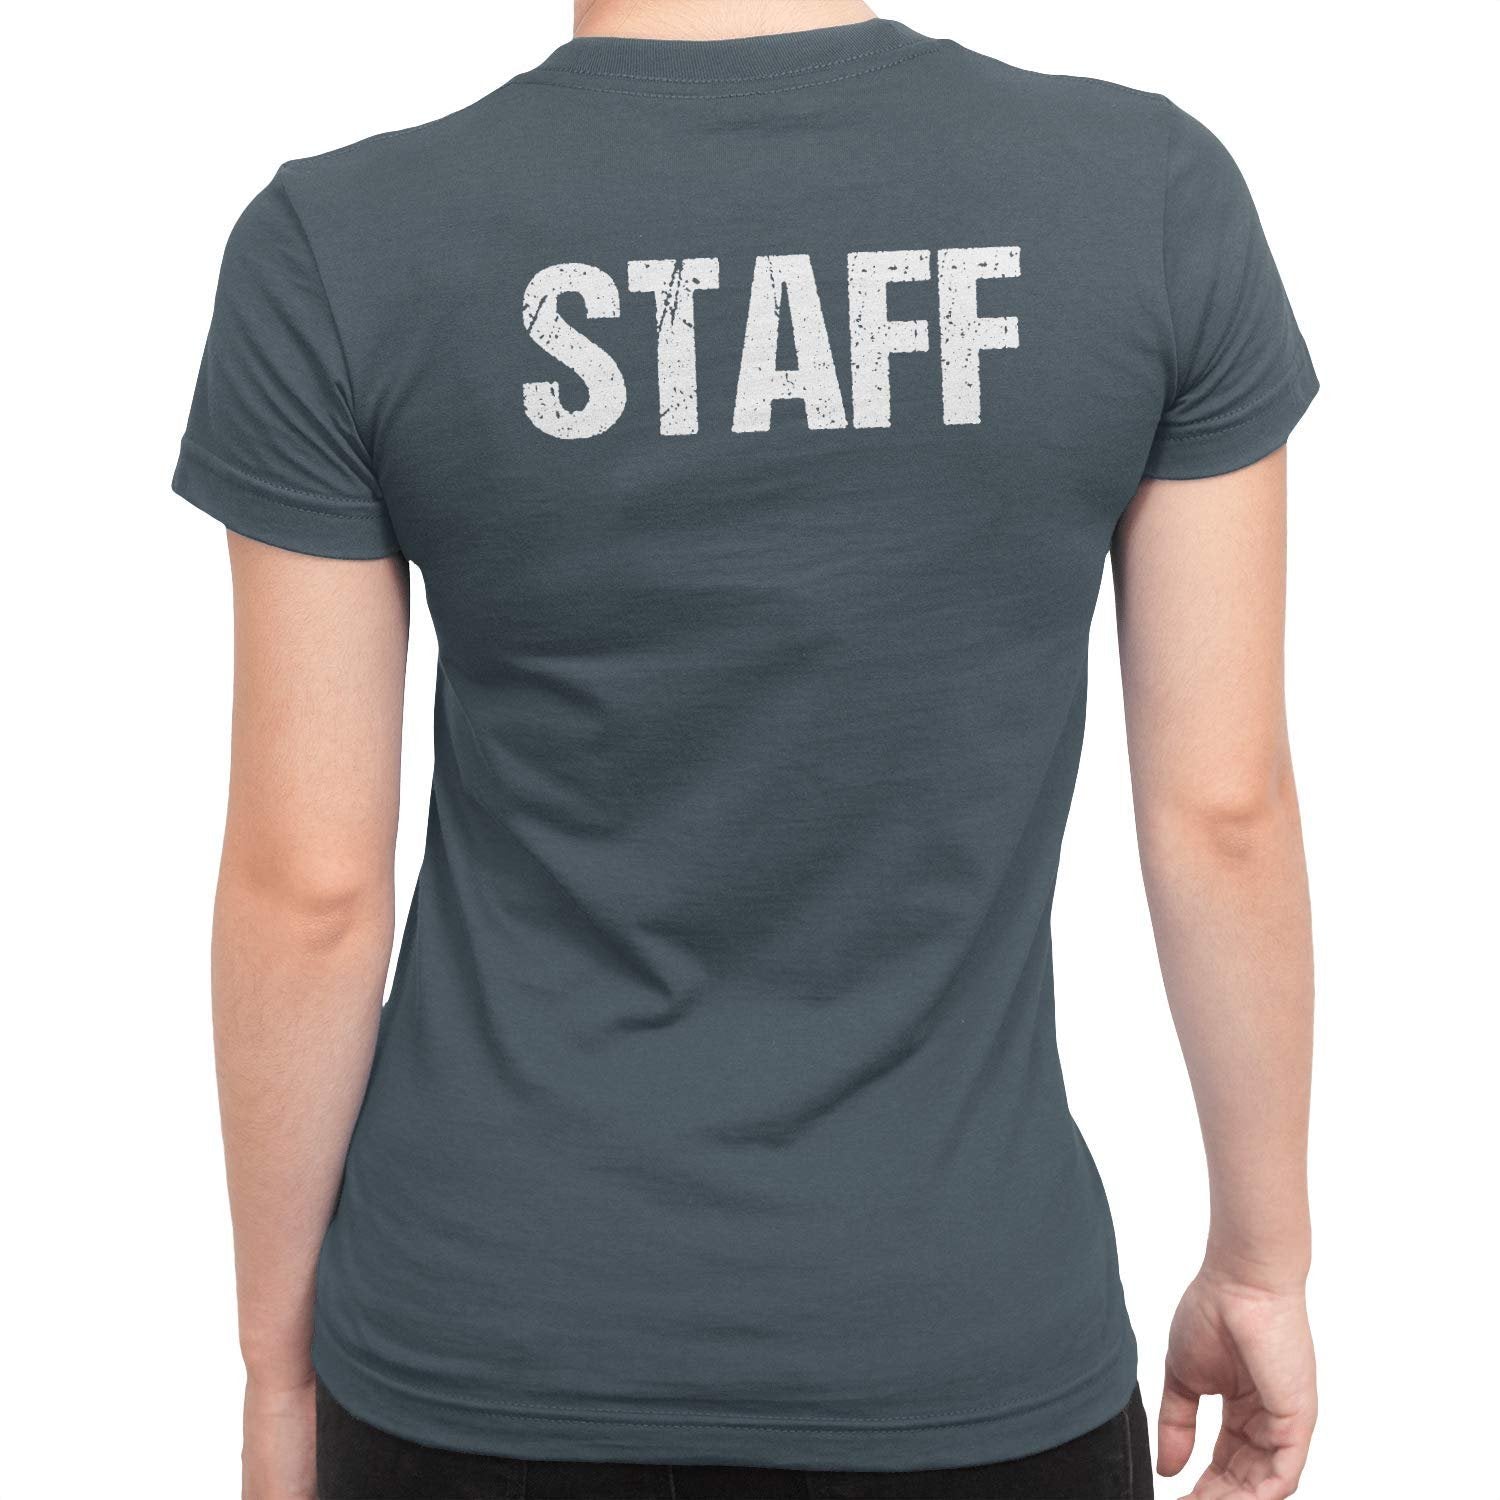 Staff Ladies Short Sleeve T-Shirt (Distressed Design, Charcoal/White)